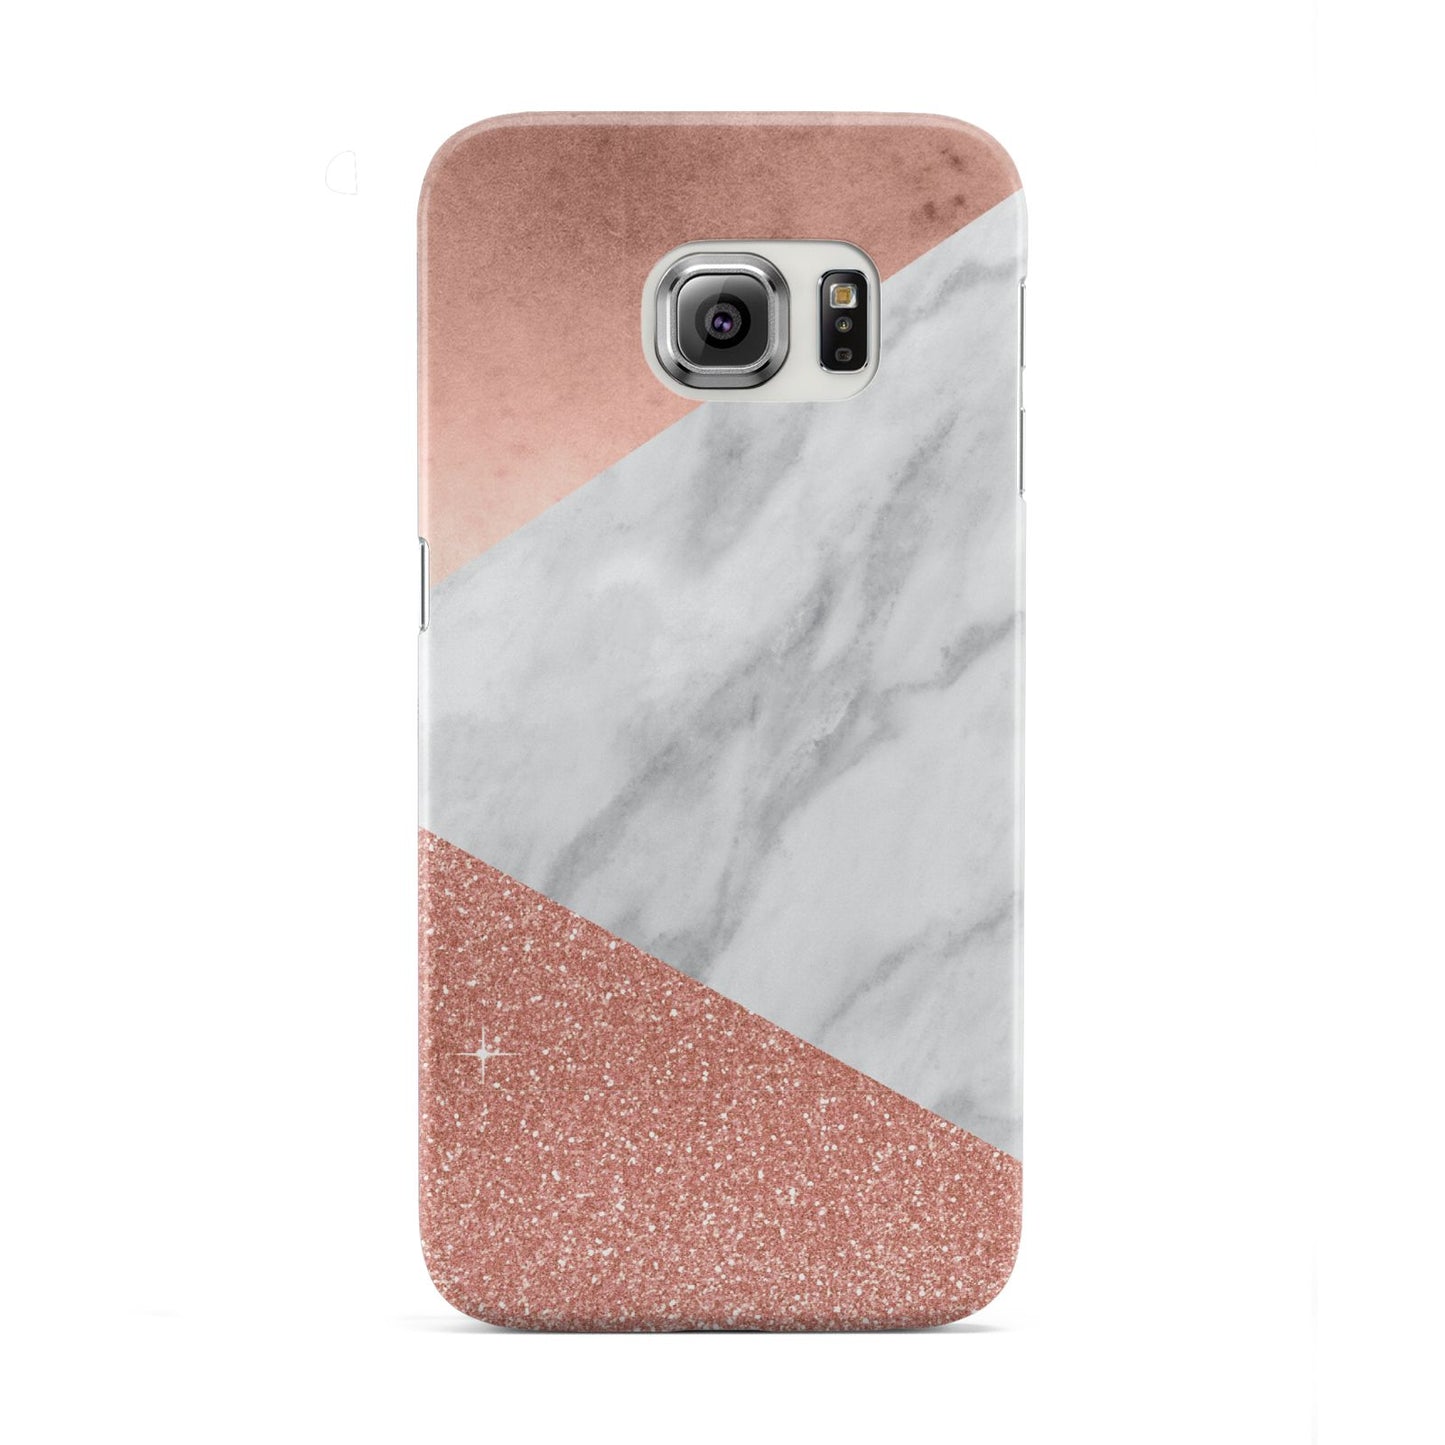 Marble Rose Gold Foil Samsung Galaxy S6 Edge Case